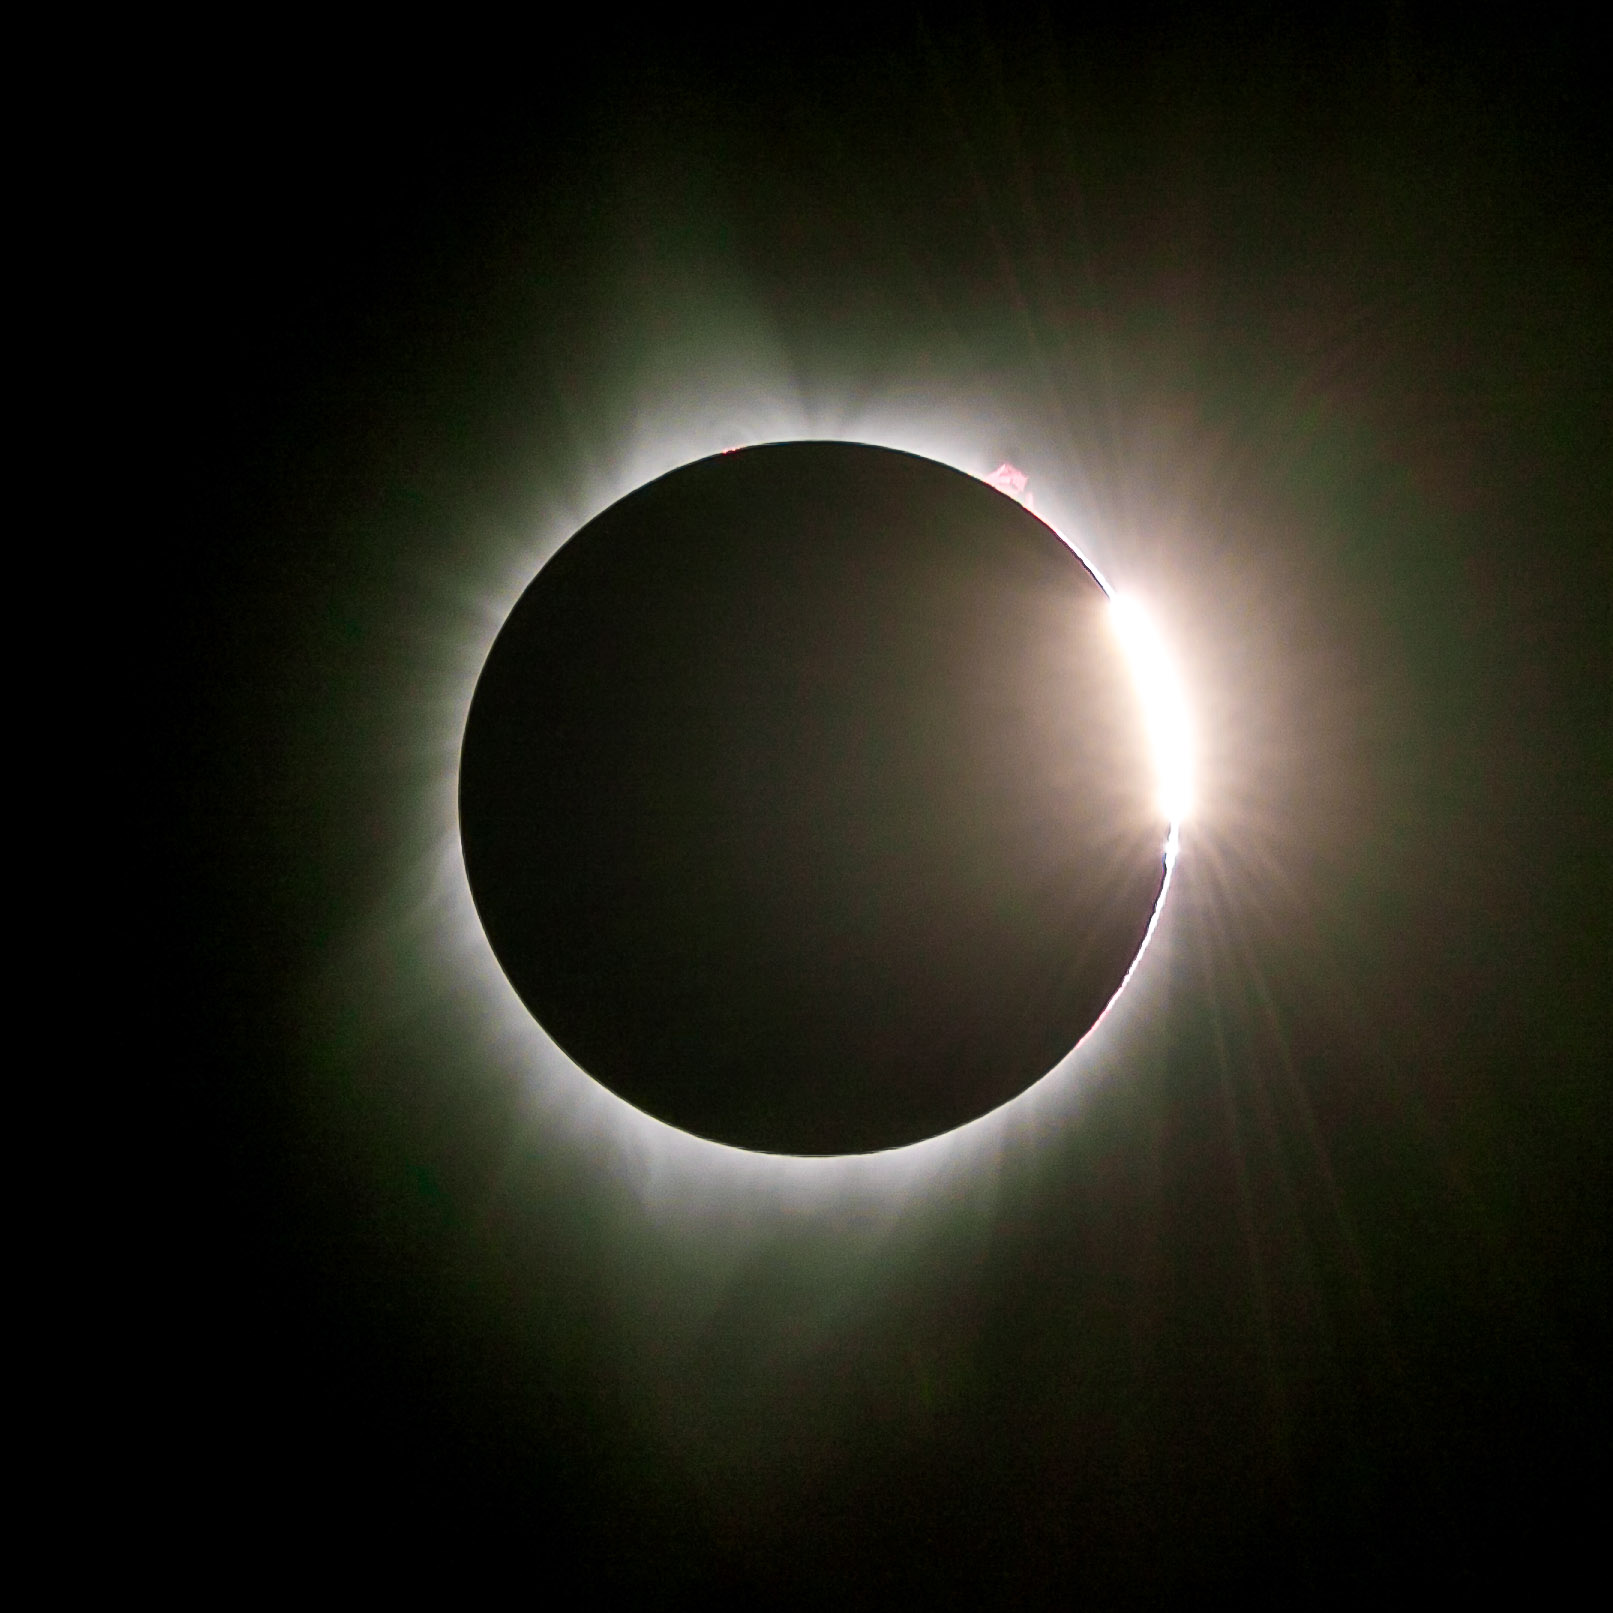 Baily's Beads transforming into Diamond Ring, 2017 Total Solar Eclipse